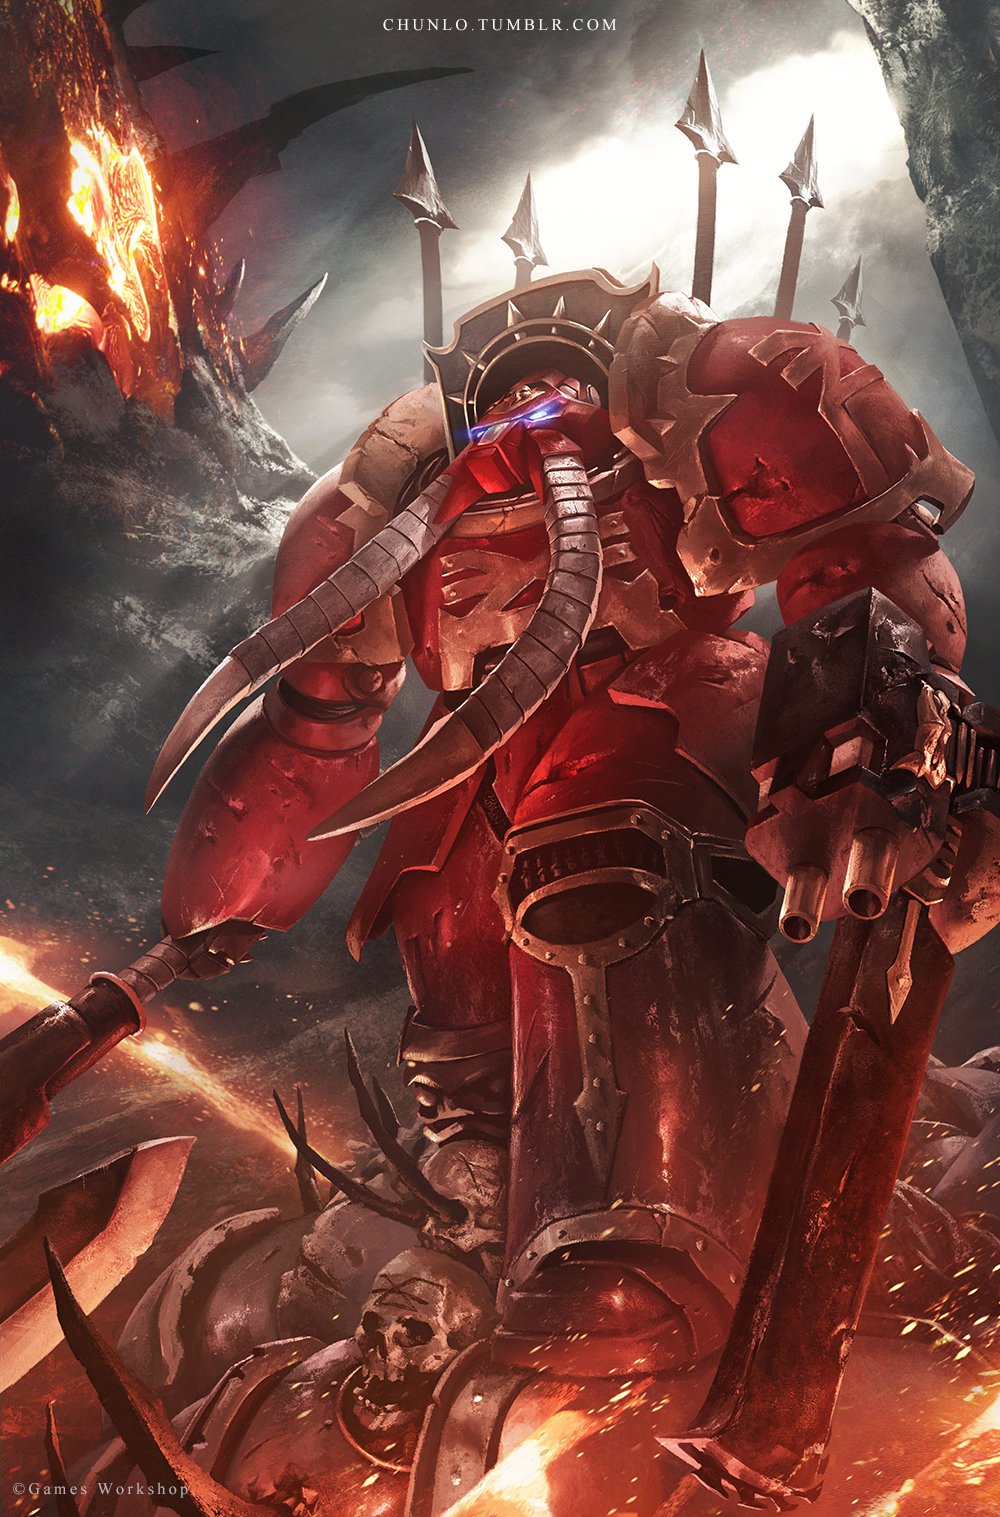 1boy adeptus_astartes armor ashes axe bayonet blue_eyes bullet chainsaw chaos_space_marine chun_lo clouds cloudy_sky death fire full_armor glowing glowing_eyes gun helmet highres holding holding_axe holding_gun holding_weapon male_focus power_armor red_armor shoulder_armor sign_of_khorne skull sky smoke solo spikes tumblr_username tusks warhammer_40k weapon